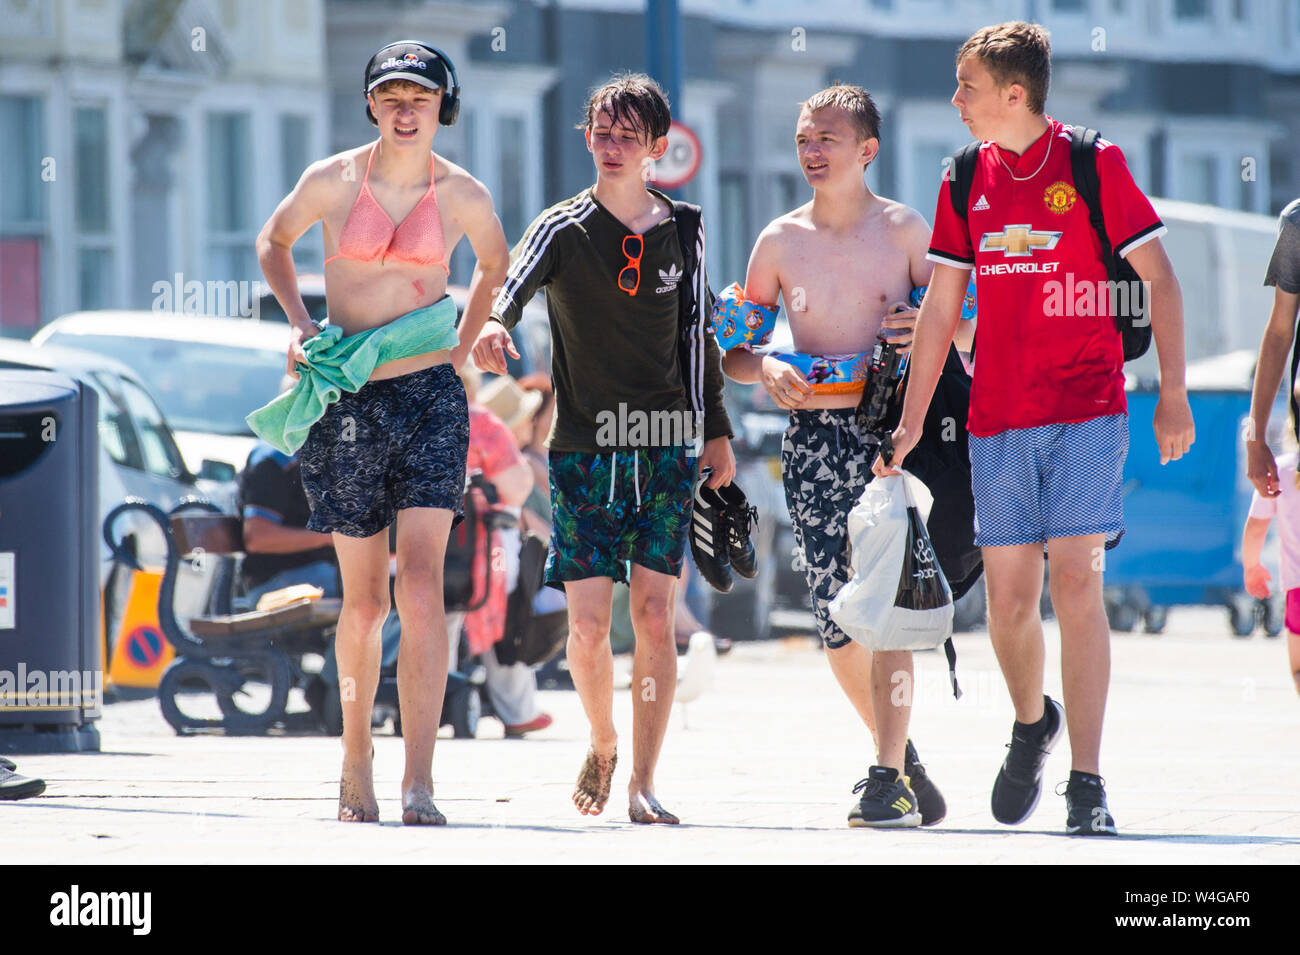 Tuesday 23 July  2019. Aberystwyth Wales UK UK weather: People at the seaside  in Aberystwyth enjoying  a sweltering summer afternoon on a day of unbroken blue skies and hot sunshine. The country is experiencing  the hottest day of the year so far as a plume of scorching hot air drifts in from the continent.  Photo credit Keith Morris / Alamy Live News Stock Photo